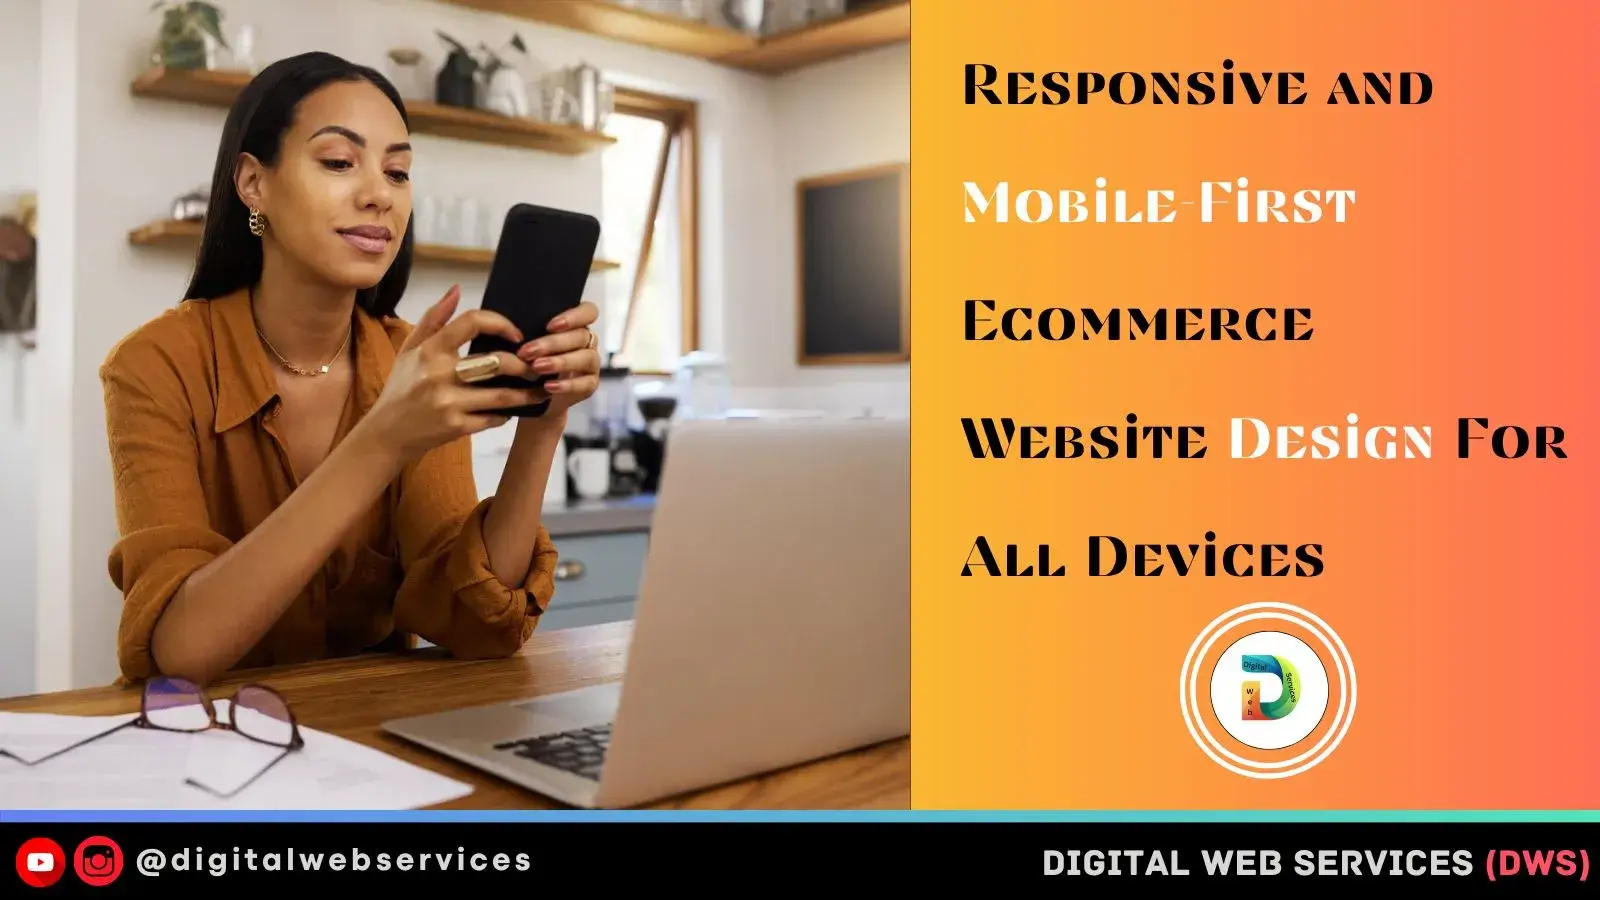 Responsive and Mobile-First Ecommerce Website Design For All Devices